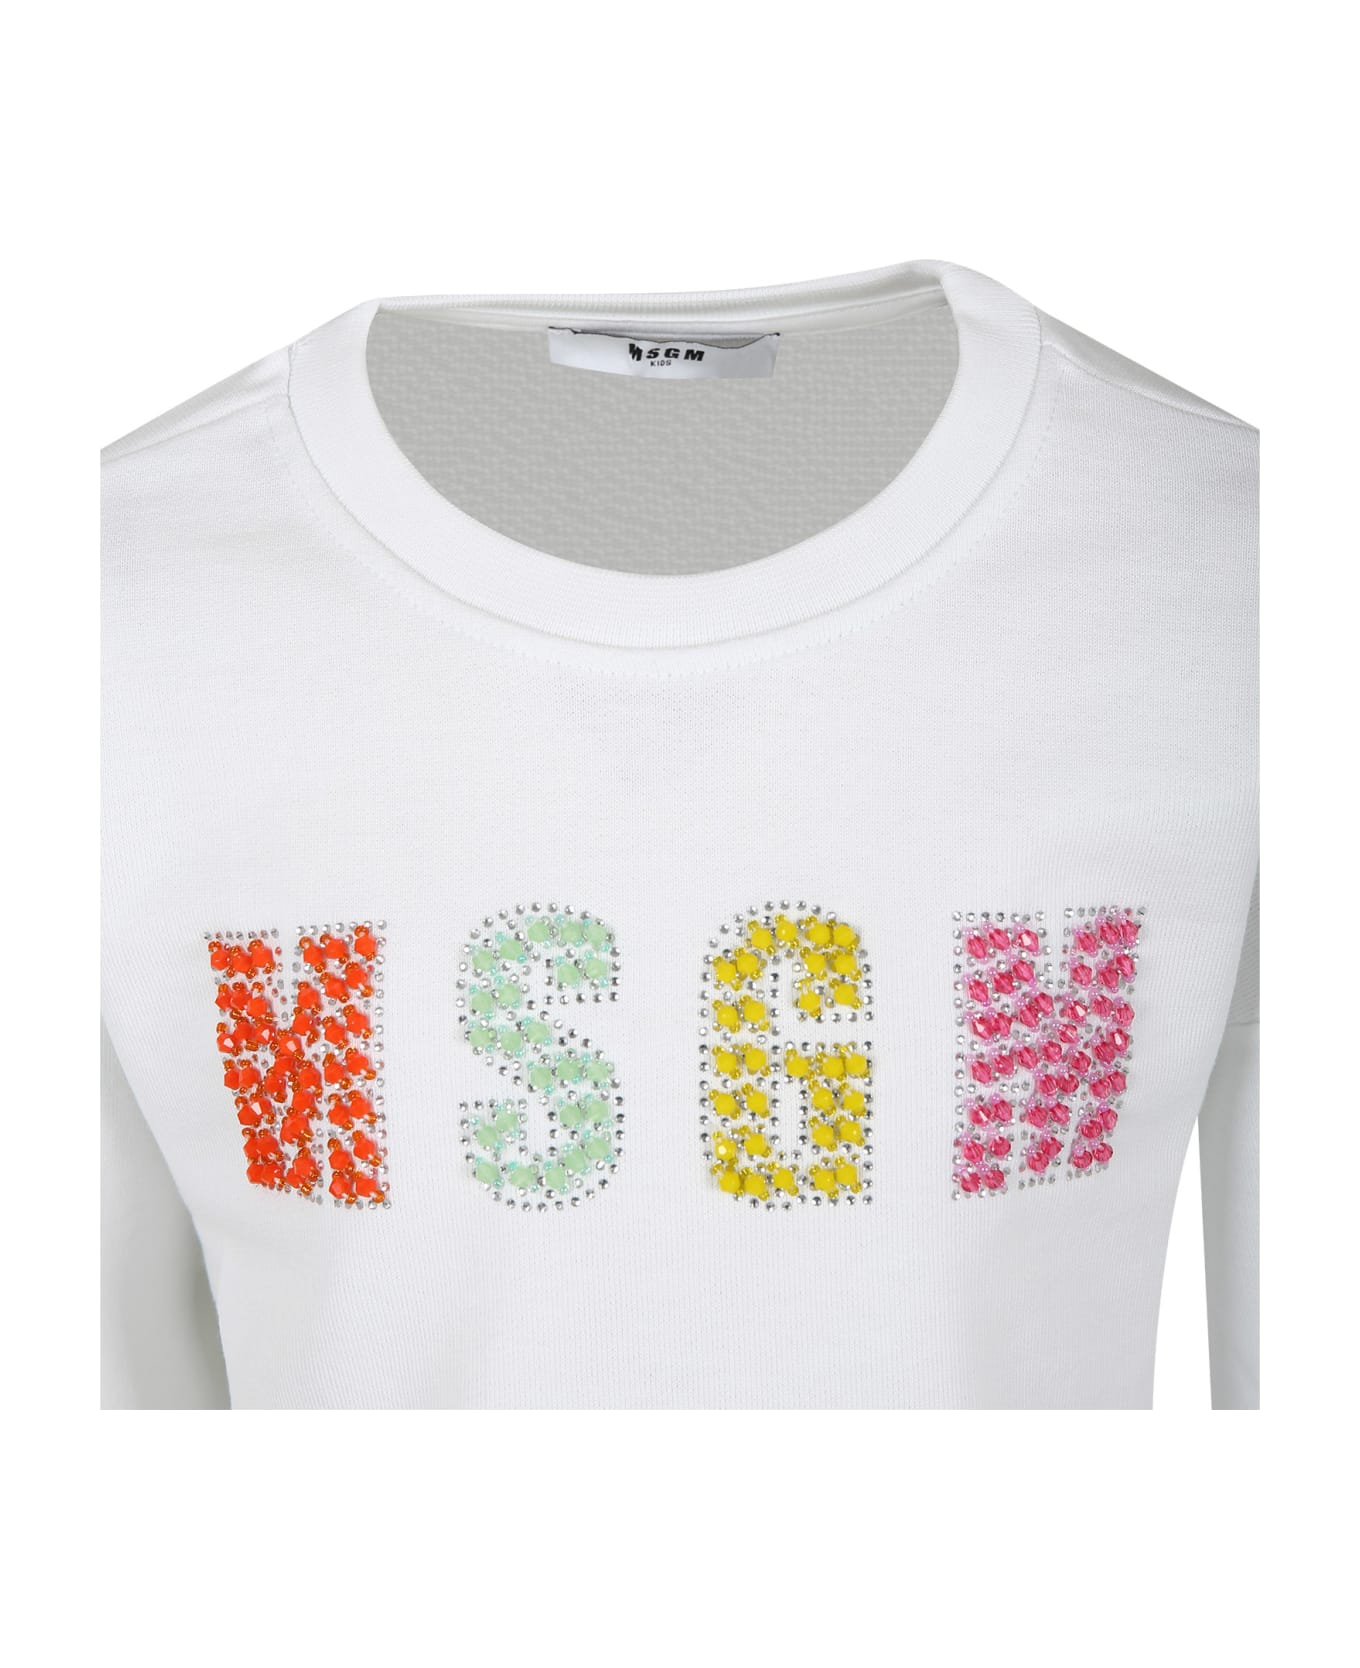 MSGM White Sweatshirt For Girl With Rhinestones And Multicolor Stones - Bianco